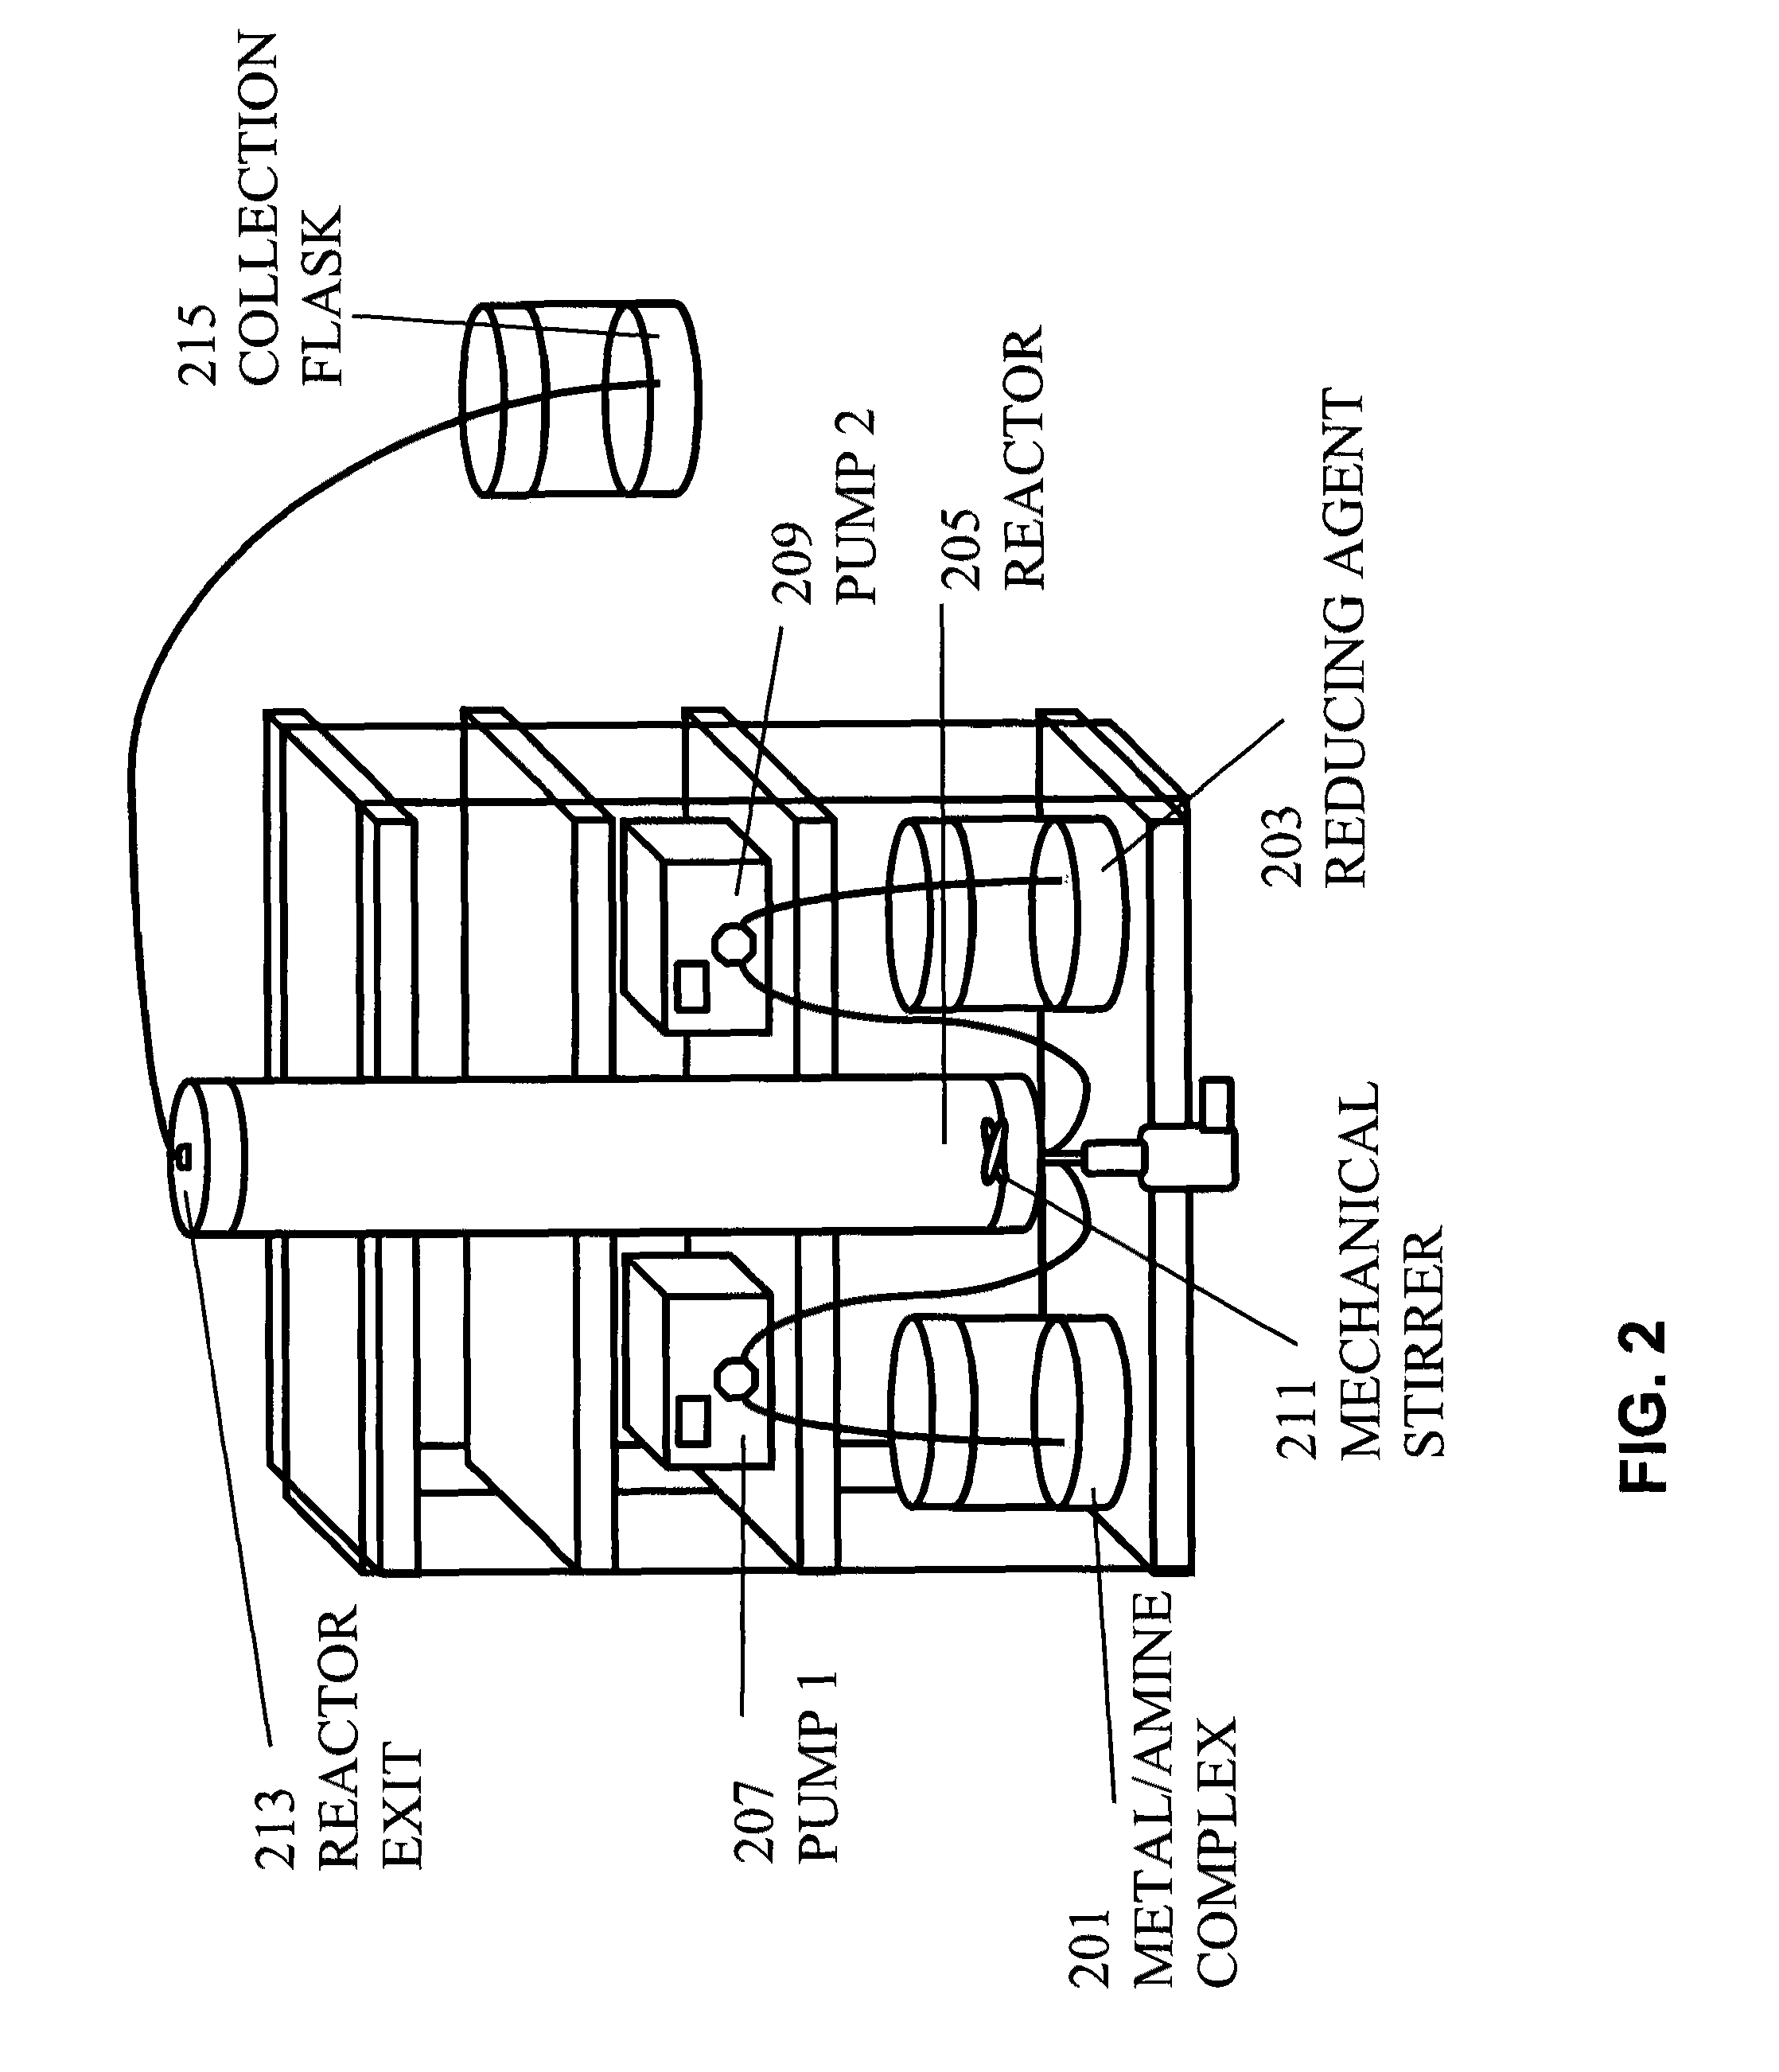 Method of controlled synthesis of nanoparticles